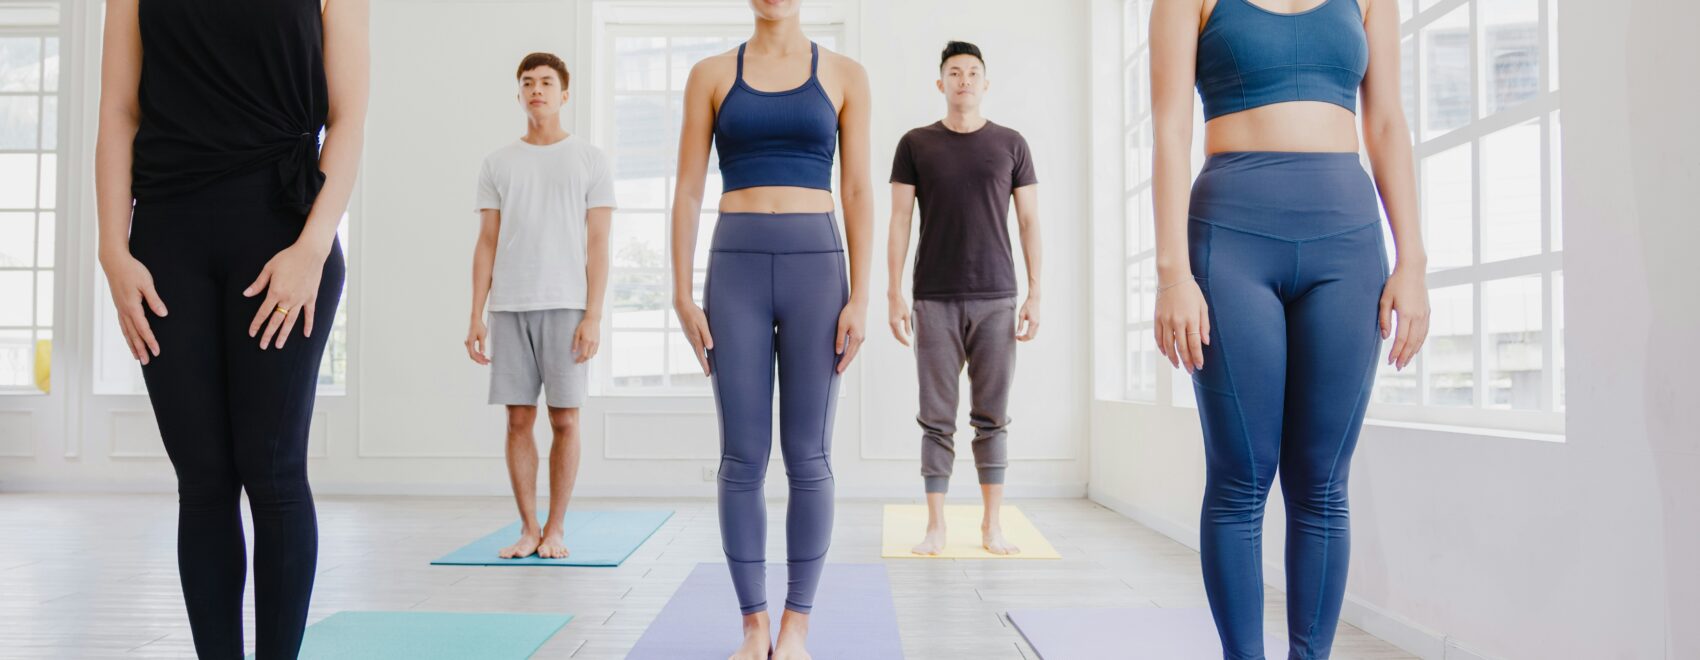 A group of people standing for a yoga class. Learn how a holistic chiropractor in the Chicago area can offer support with improving posture. Search for Chiropractor Orland Park to learn more about a holistic doctor in Orland Park, IL can offer support.